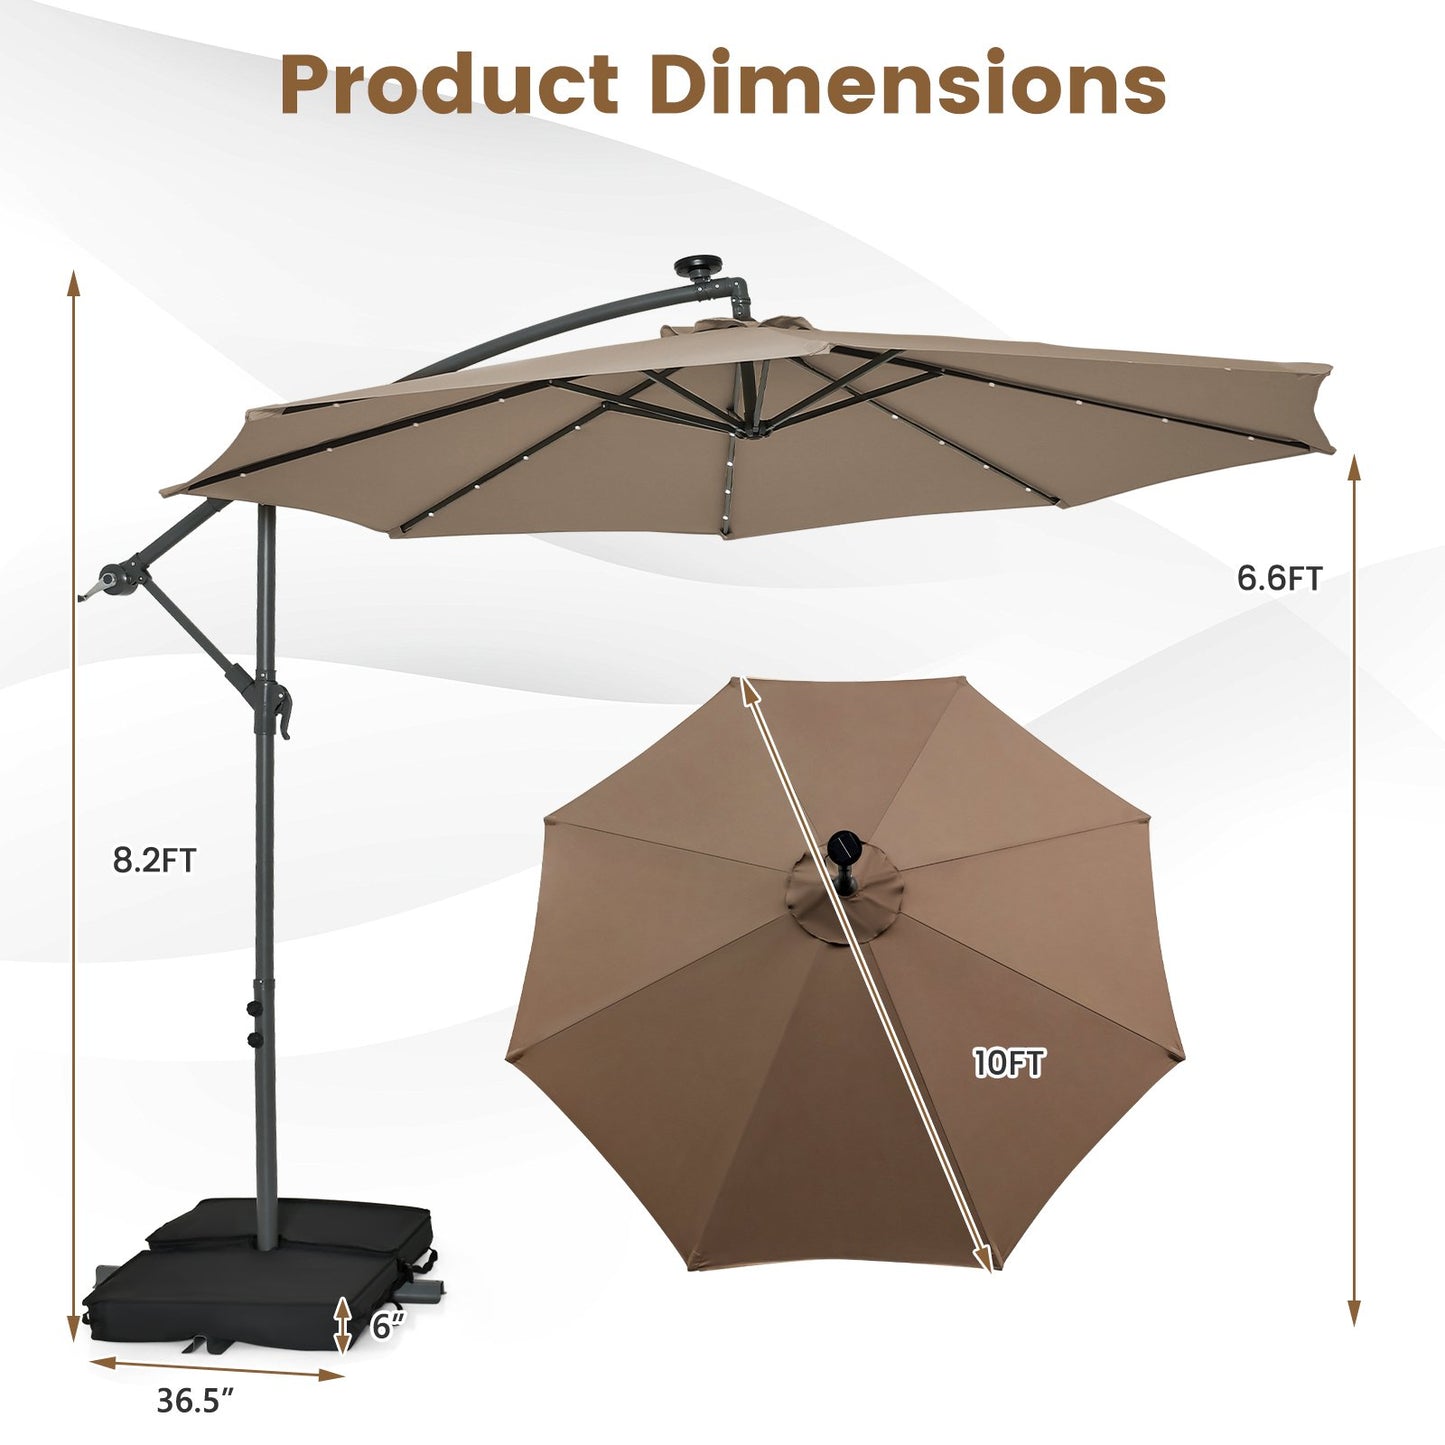 10 Feet Cantilever Umbrella with 32 LED Lights and Solar Panel Batteries, Tan